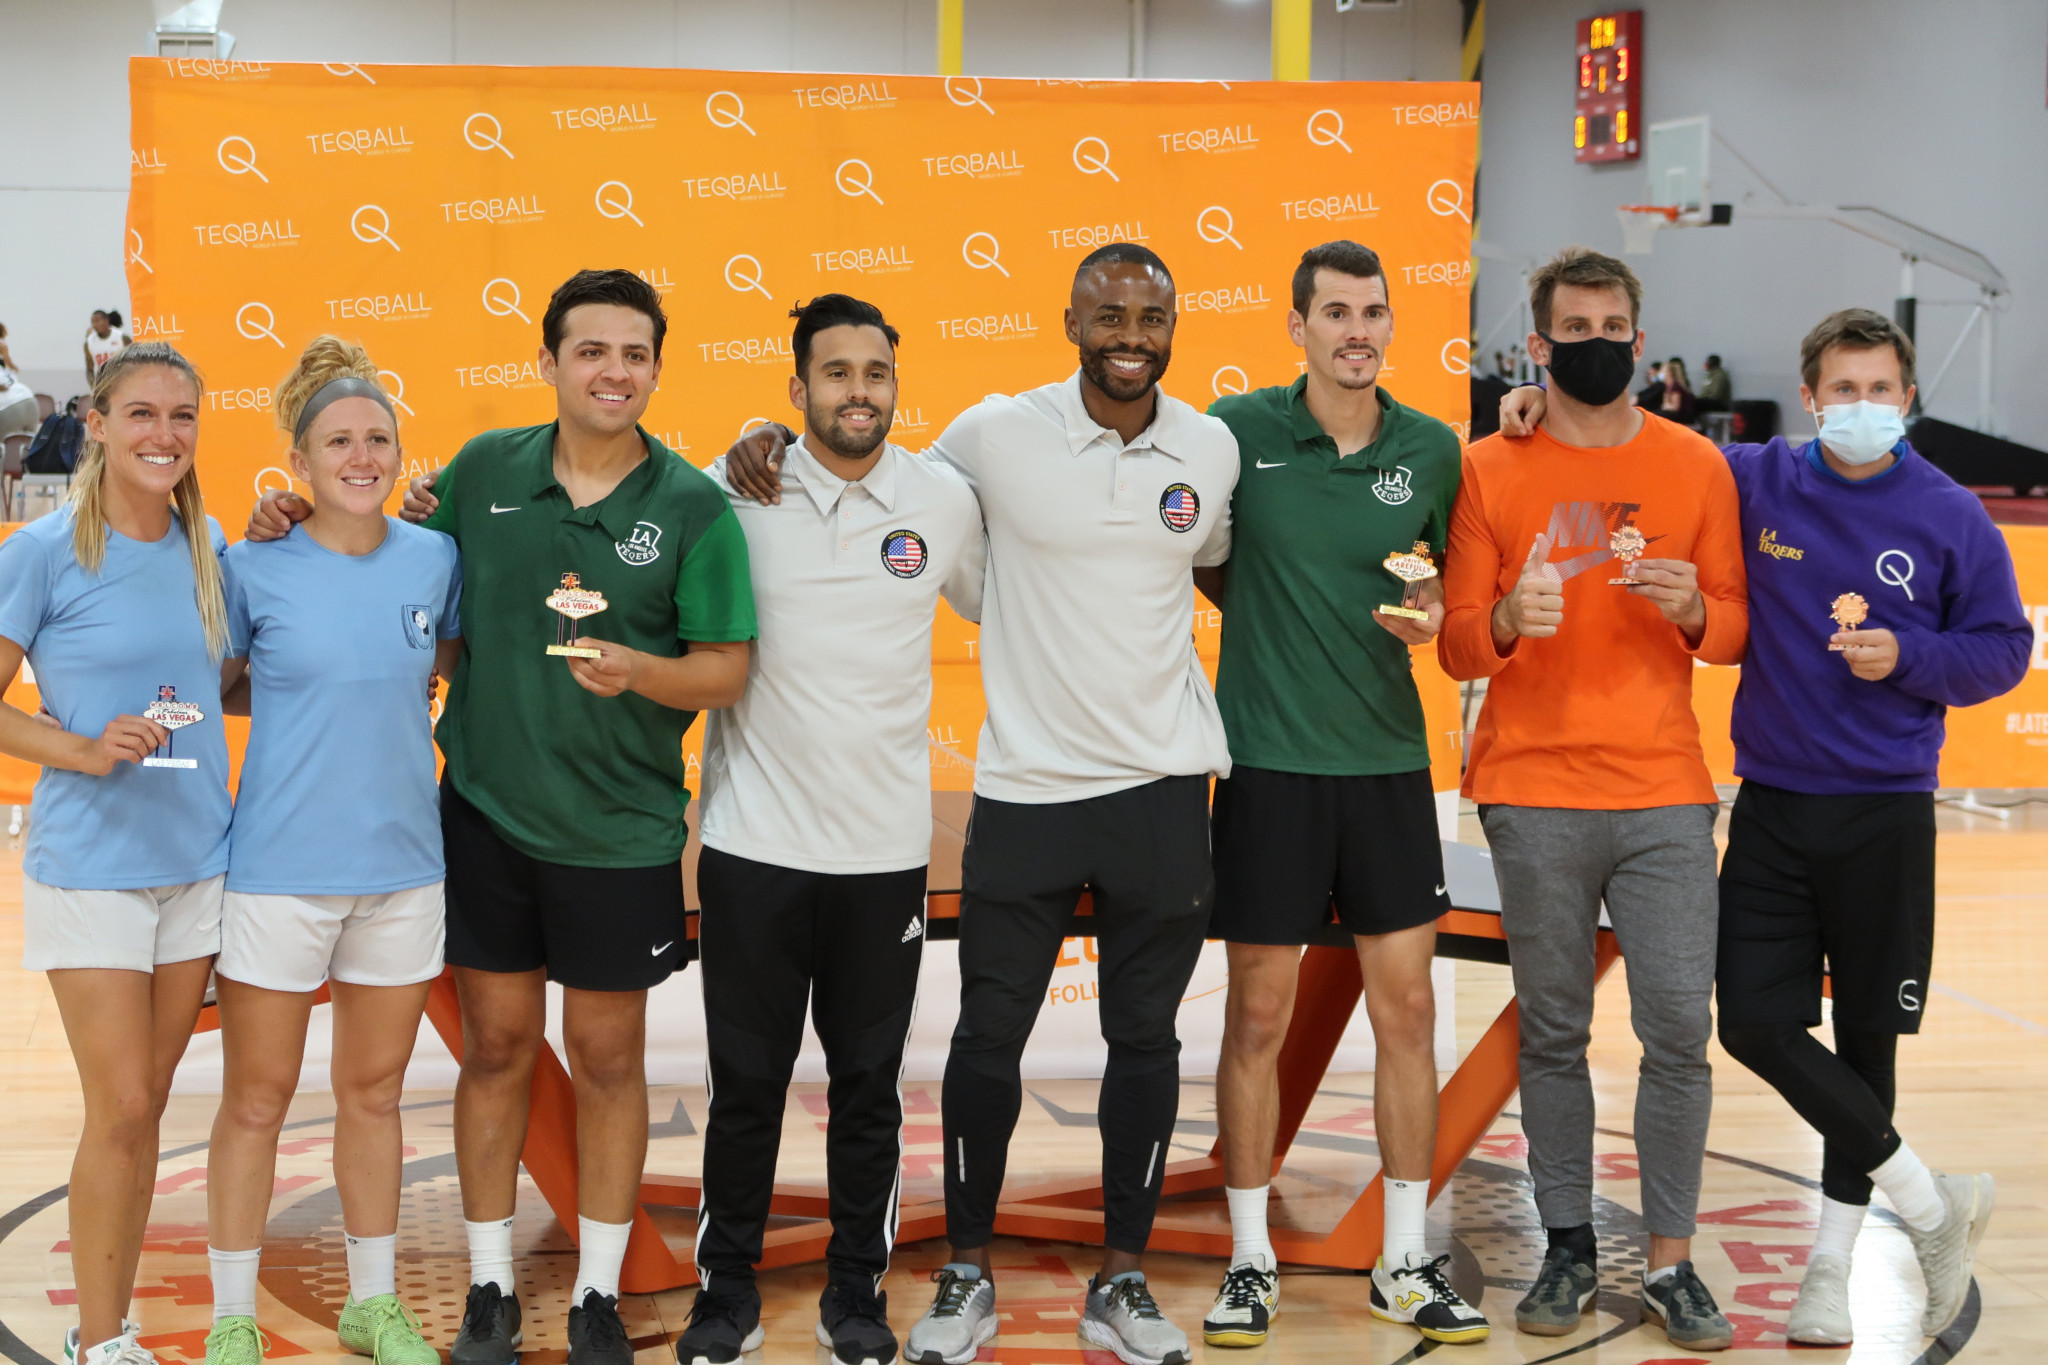 Las Vegas hosted a Teqball Challenger Cup event ©FITEQ